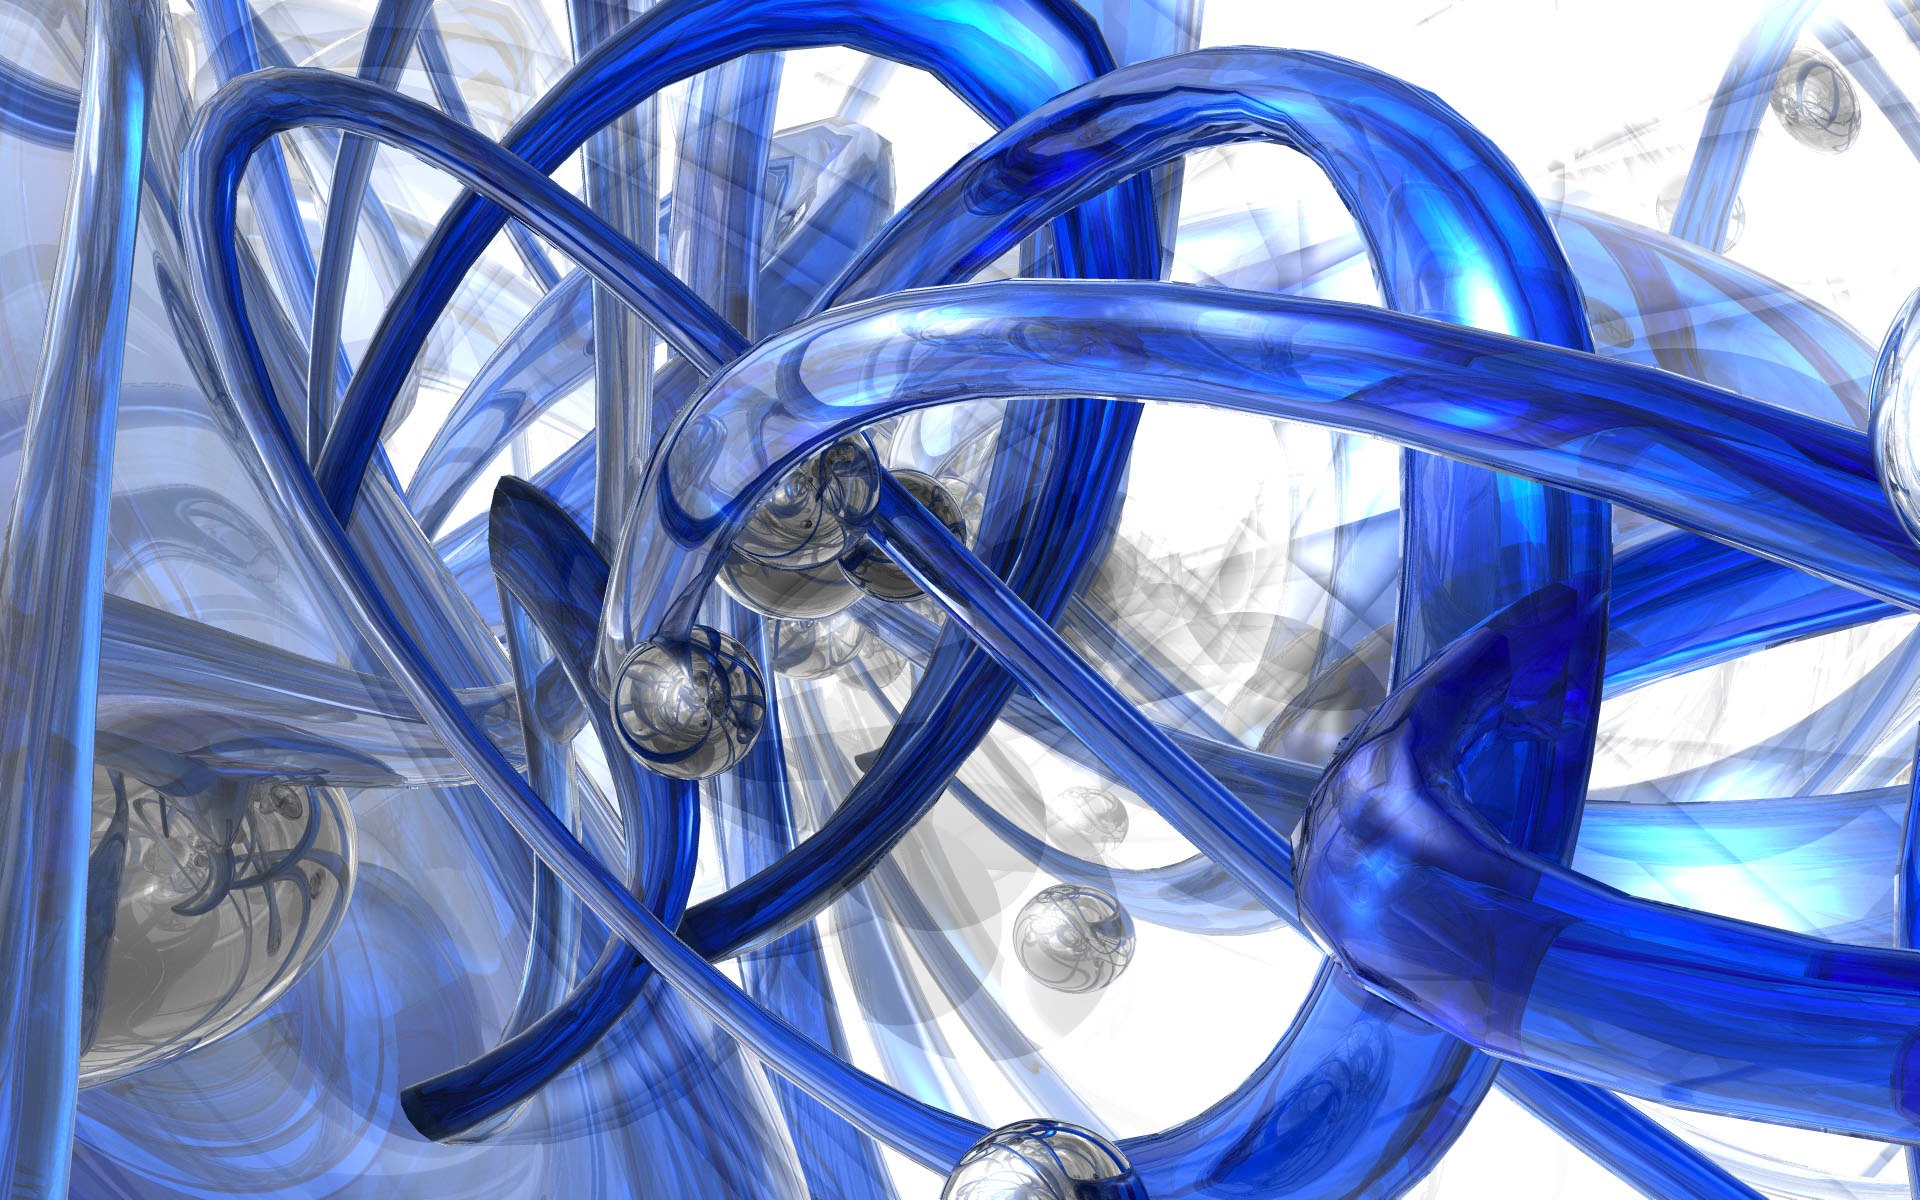 3d, abstract, blue, cgi wallpaper for mobile